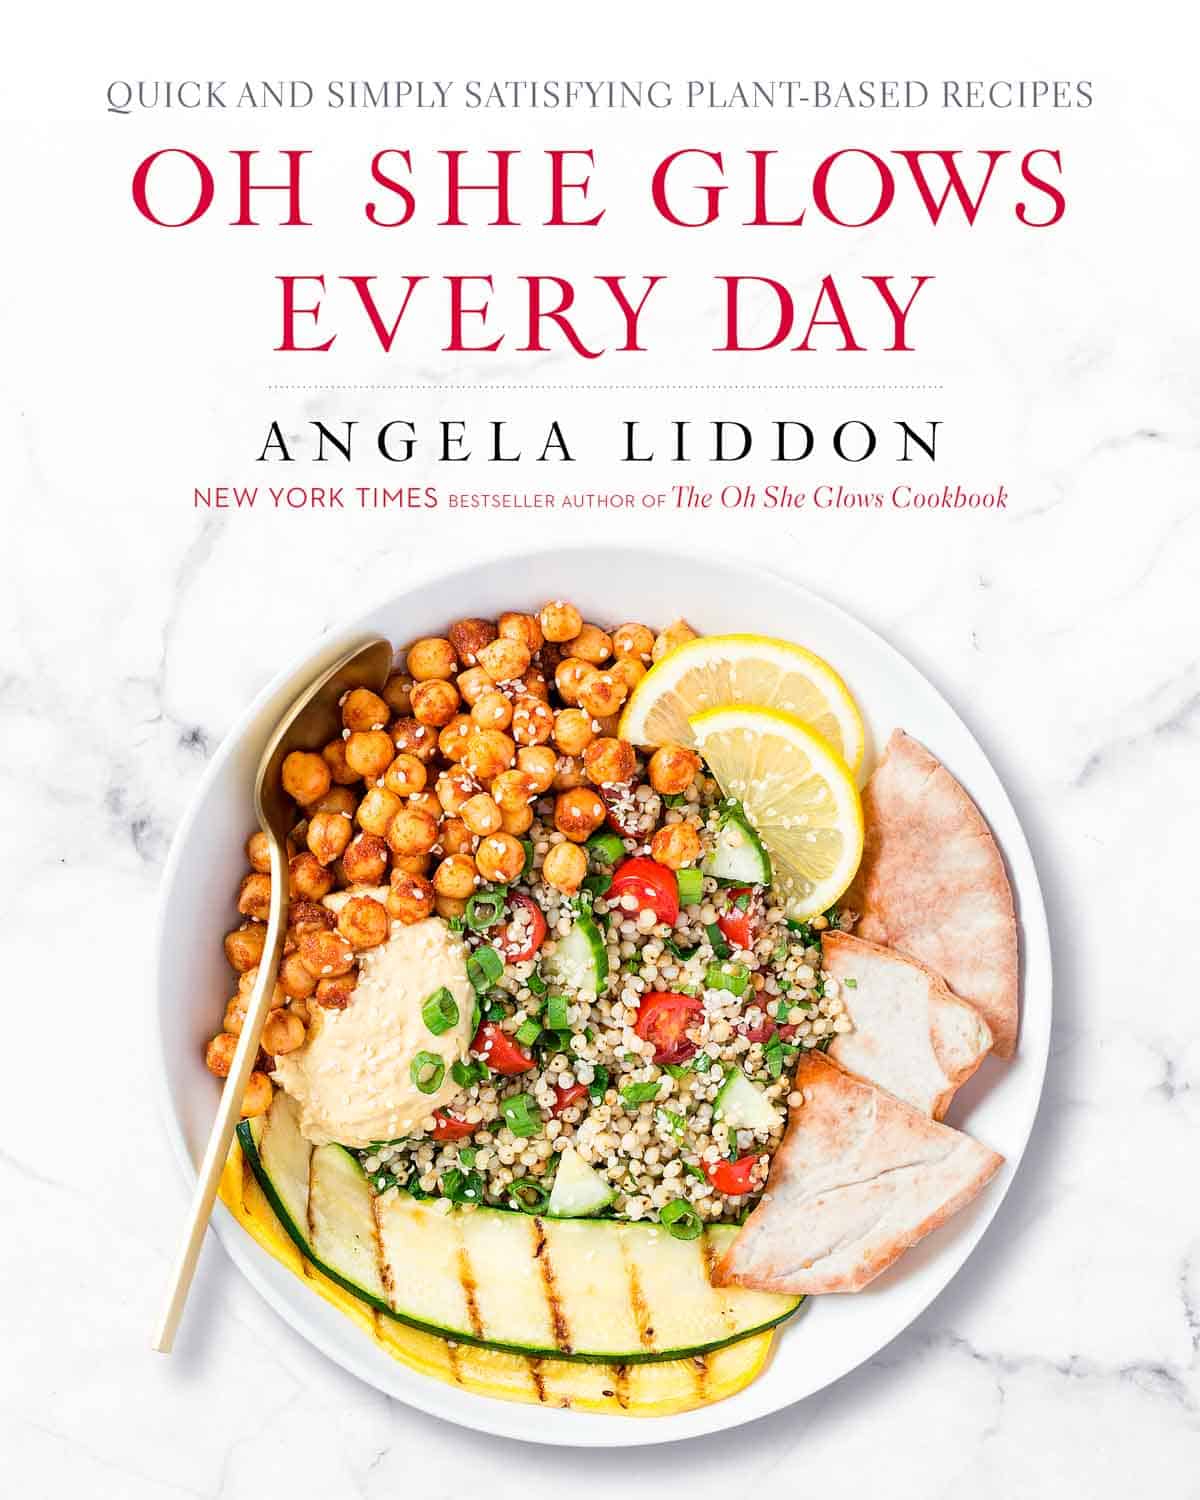 Oh She Glows Every Day cookbook cover 